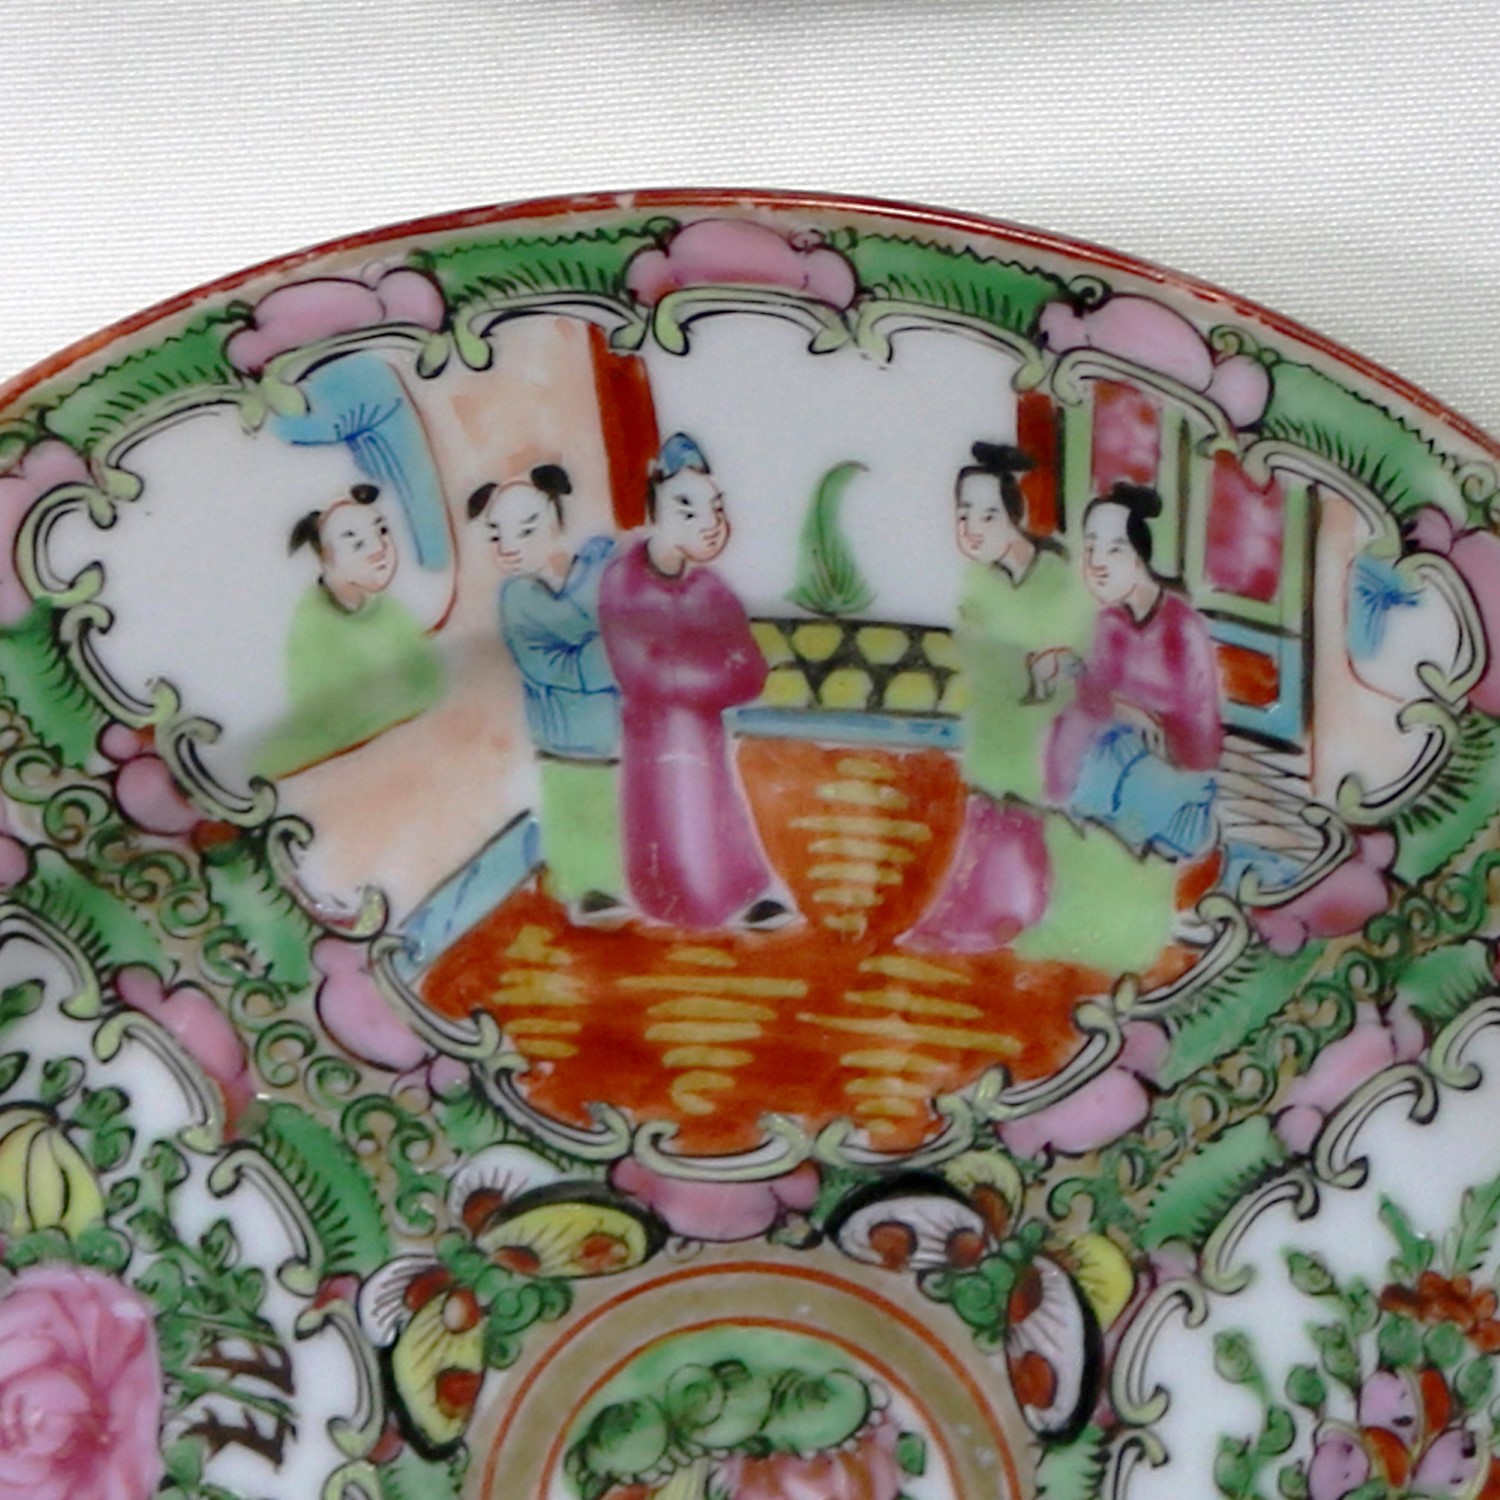 Antique Chinese Qing Rose Medallion Porcelain Nine Inch Plates Traditional Design Set of 4 Peeking - 2 and 2